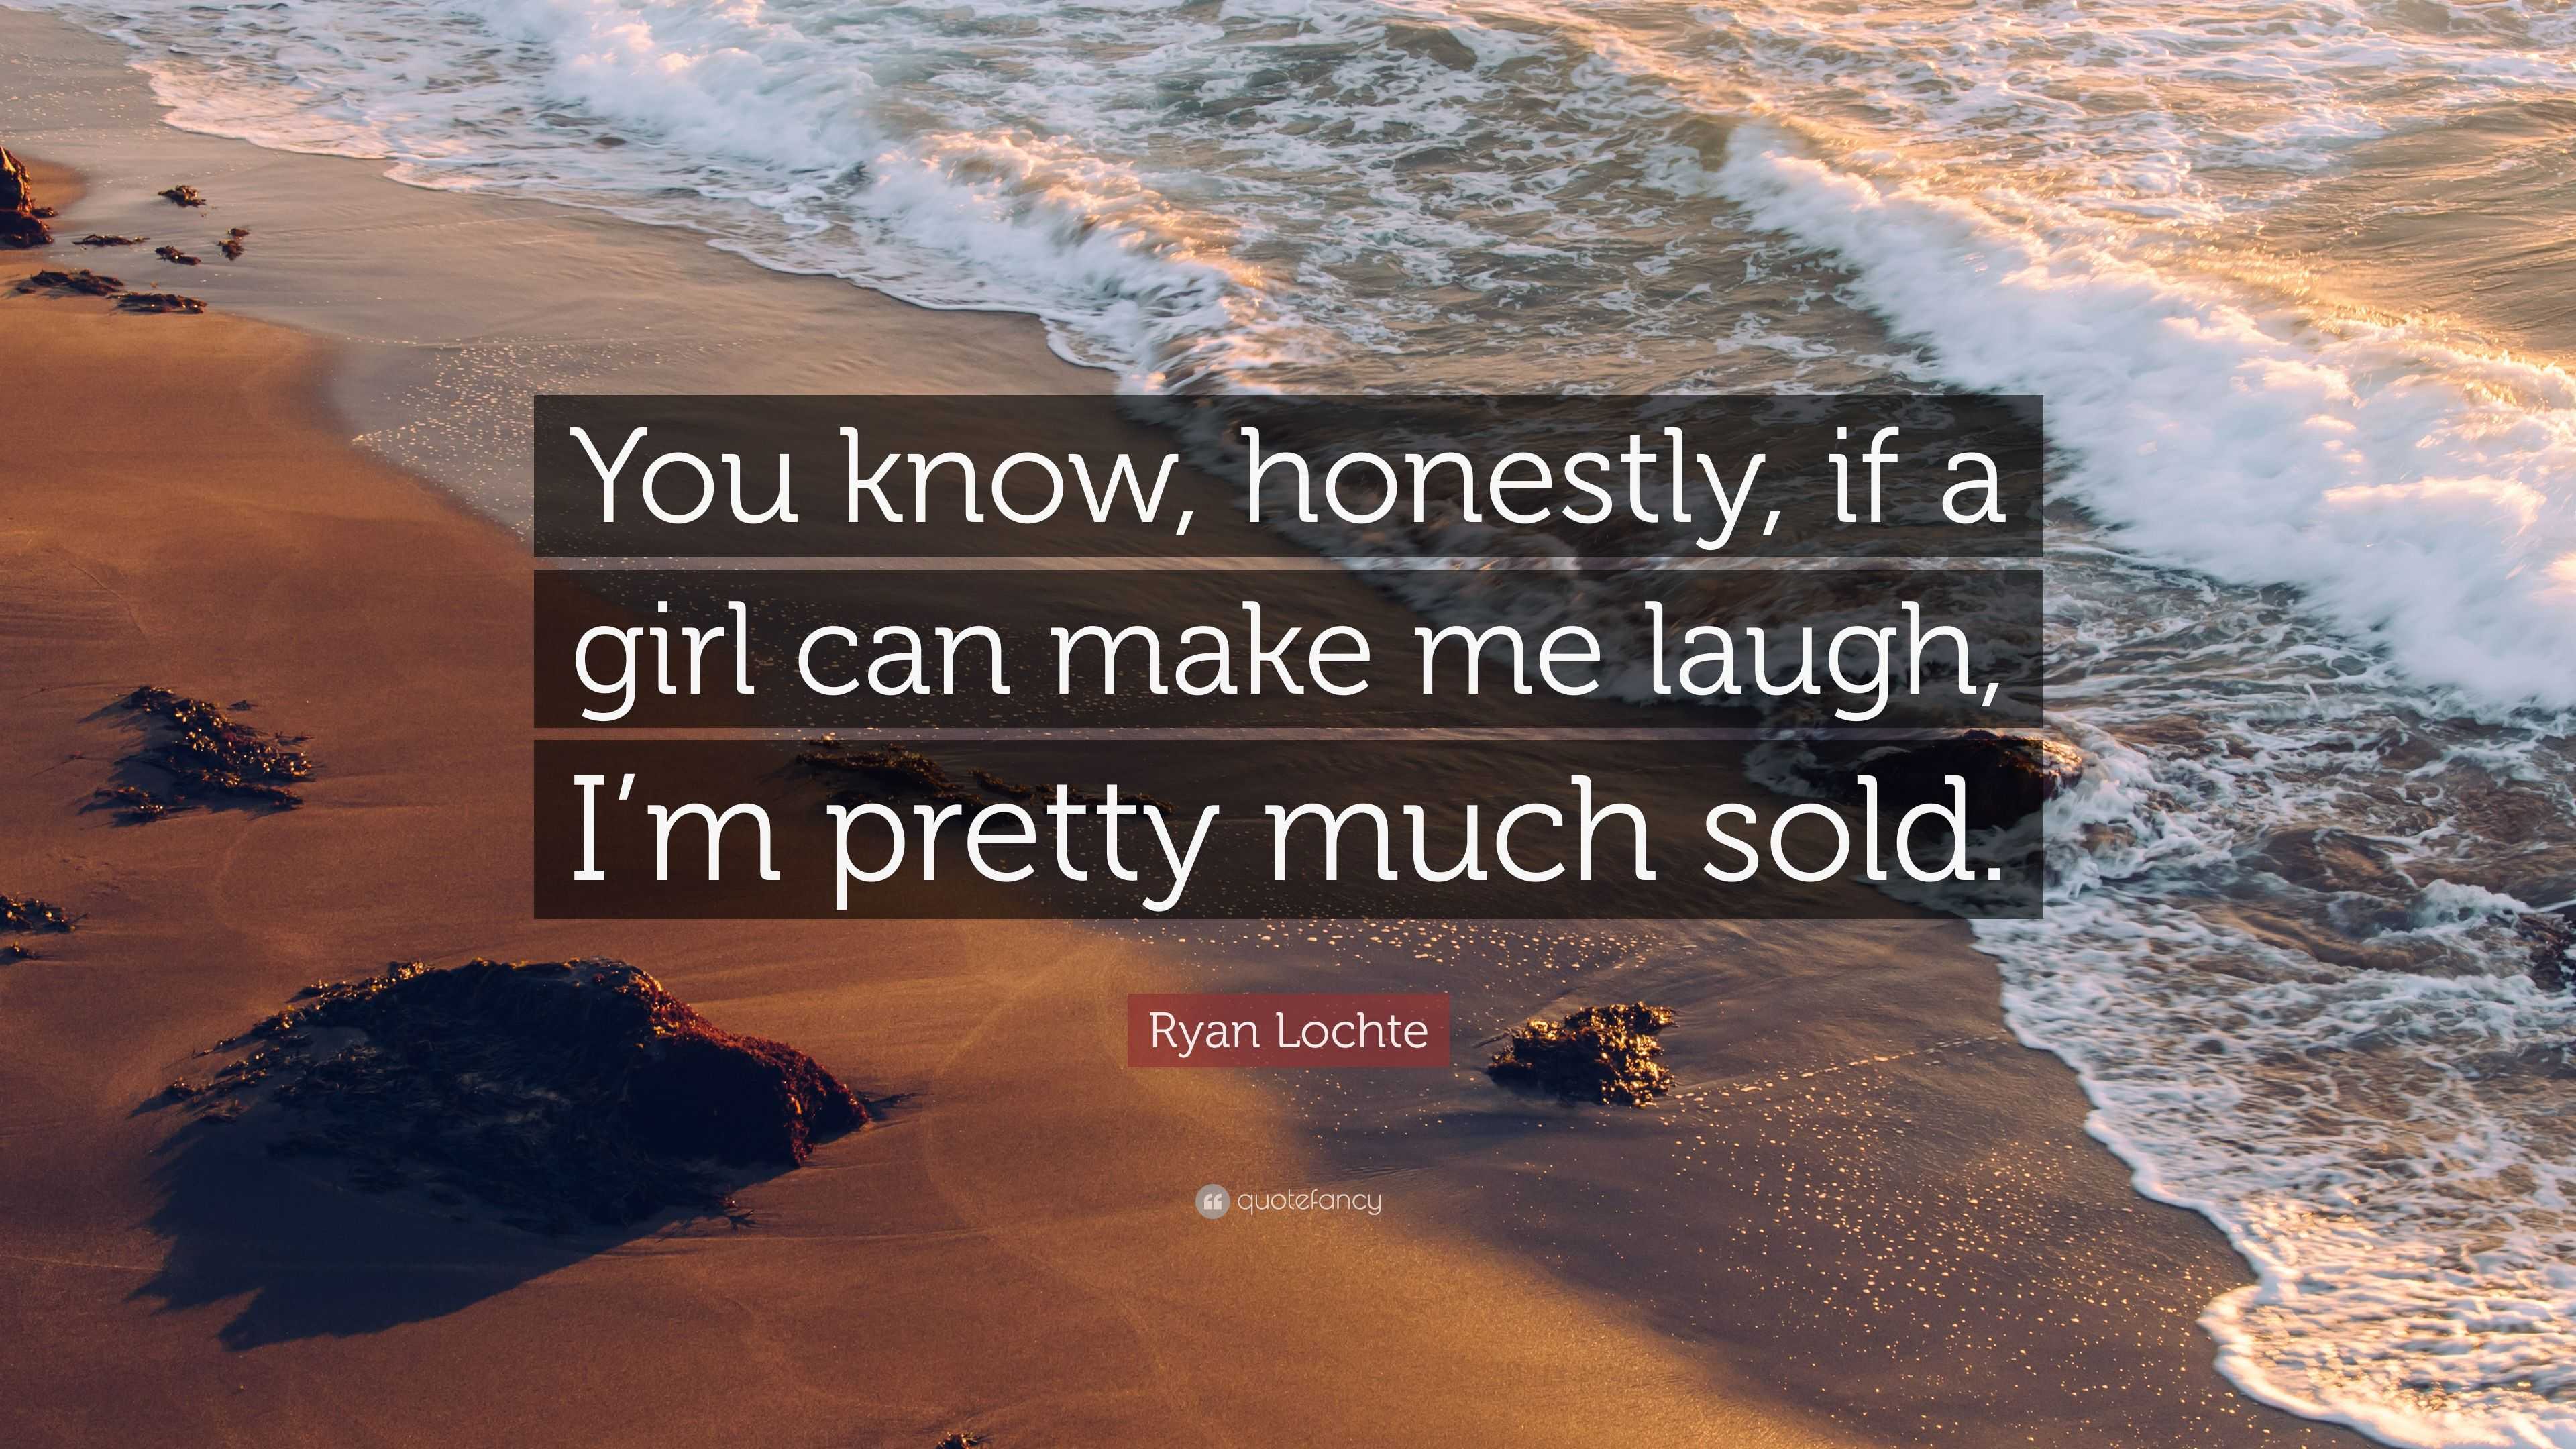 Ryan Lochte Quote: "You know, honestly, if a girl can make ...